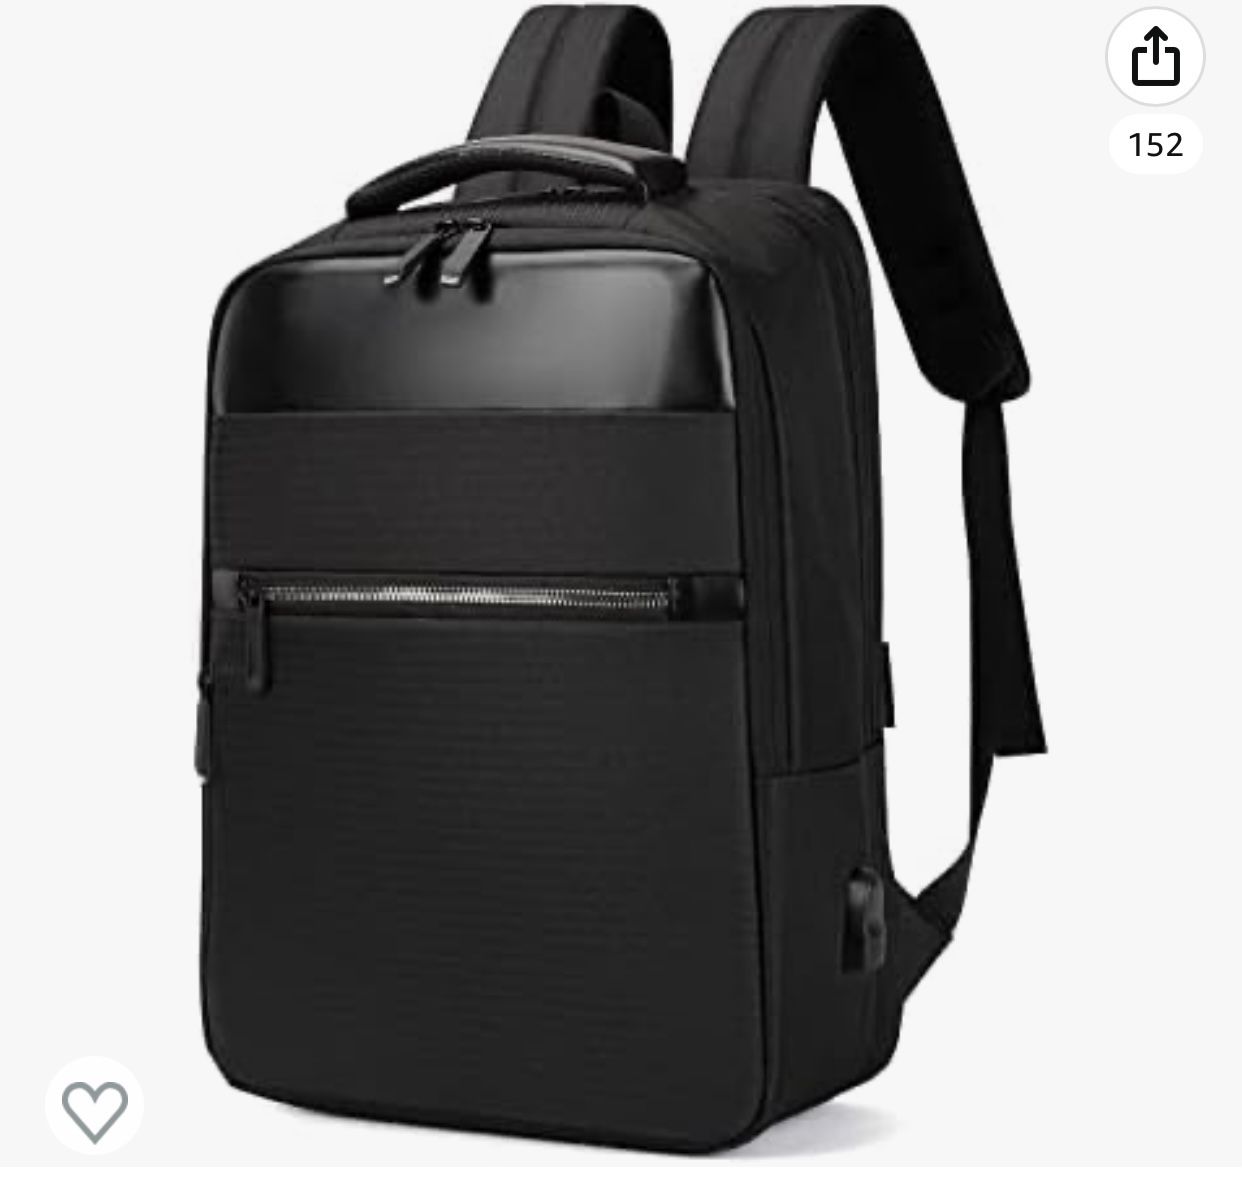 Anectria Laptop Backpack 15.6 Inch